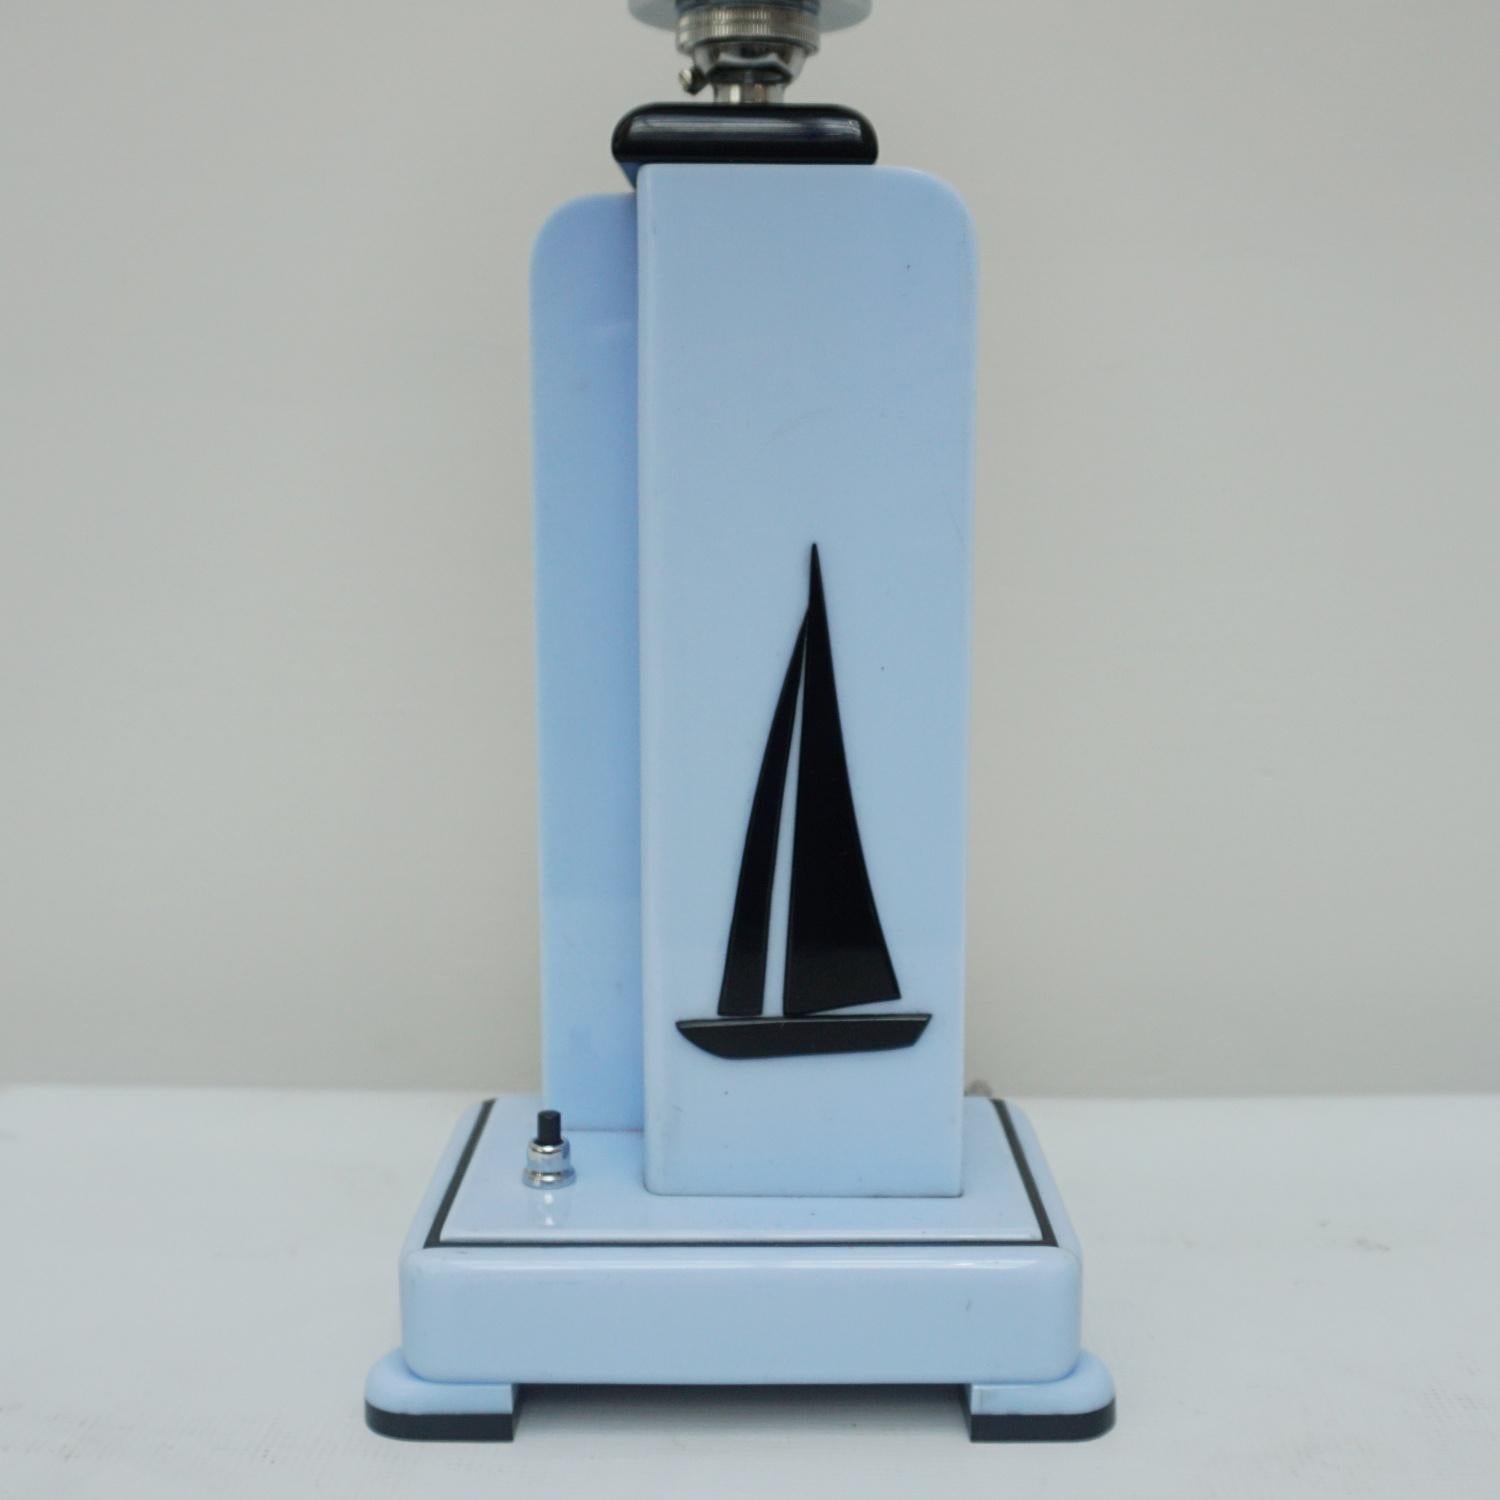 A Yachtsman's table lamp. Blue and black acrylic with a sailing yacht depicted in the stem. Chromed metal with a white glass globe shade. 

Dimensions: H 52cm W 16cm D 11cm 

Origin: English

Item Number: J241

All of our lighting is fully